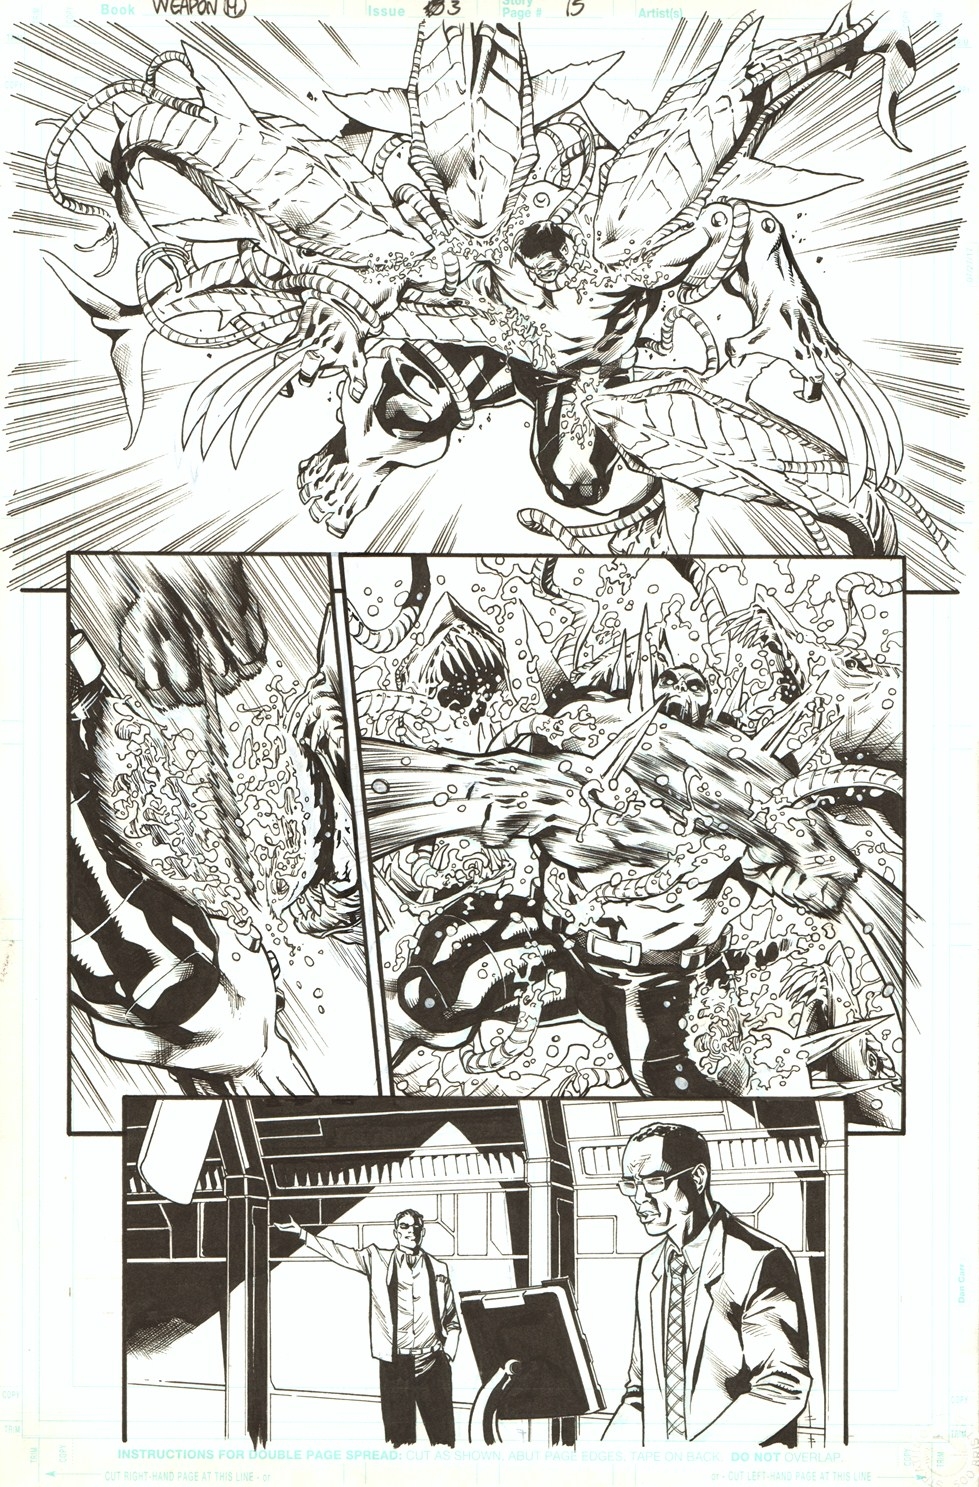 Weapon H #3 pg 15 by Cory Smith (ft Hulk/Wolverine hybrid), in K